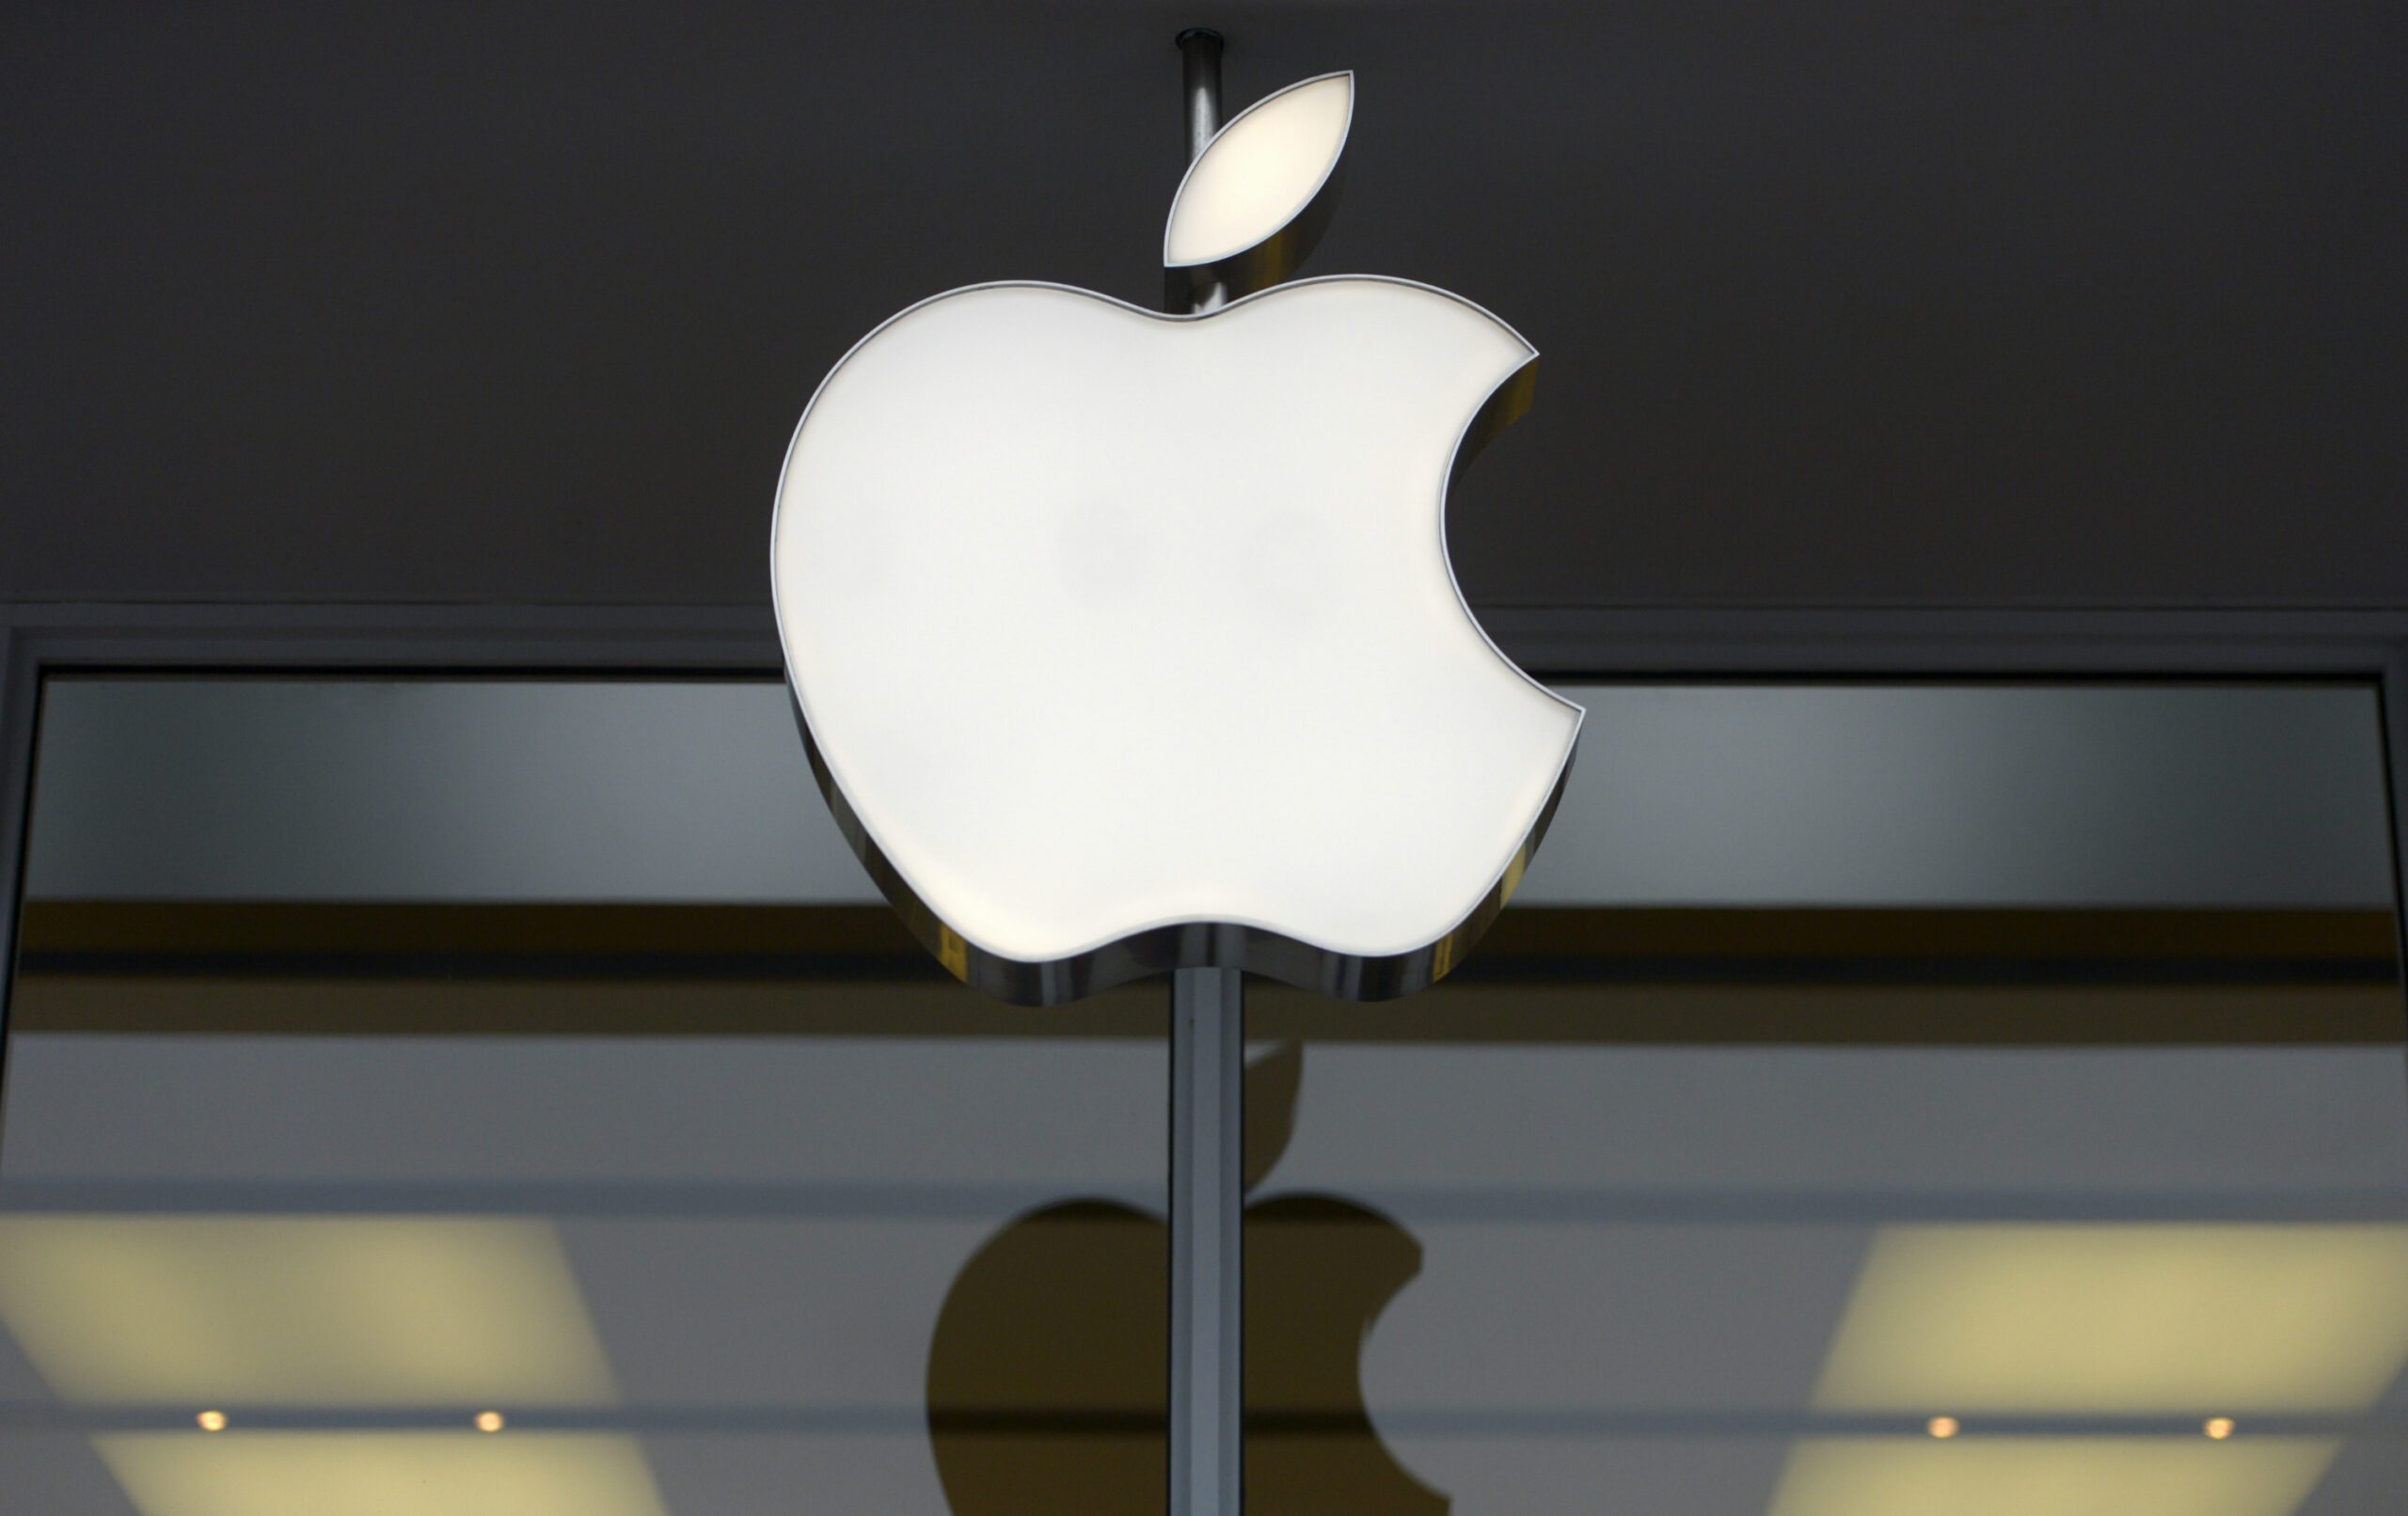 Apple ordered to pay more than $625M in patent case